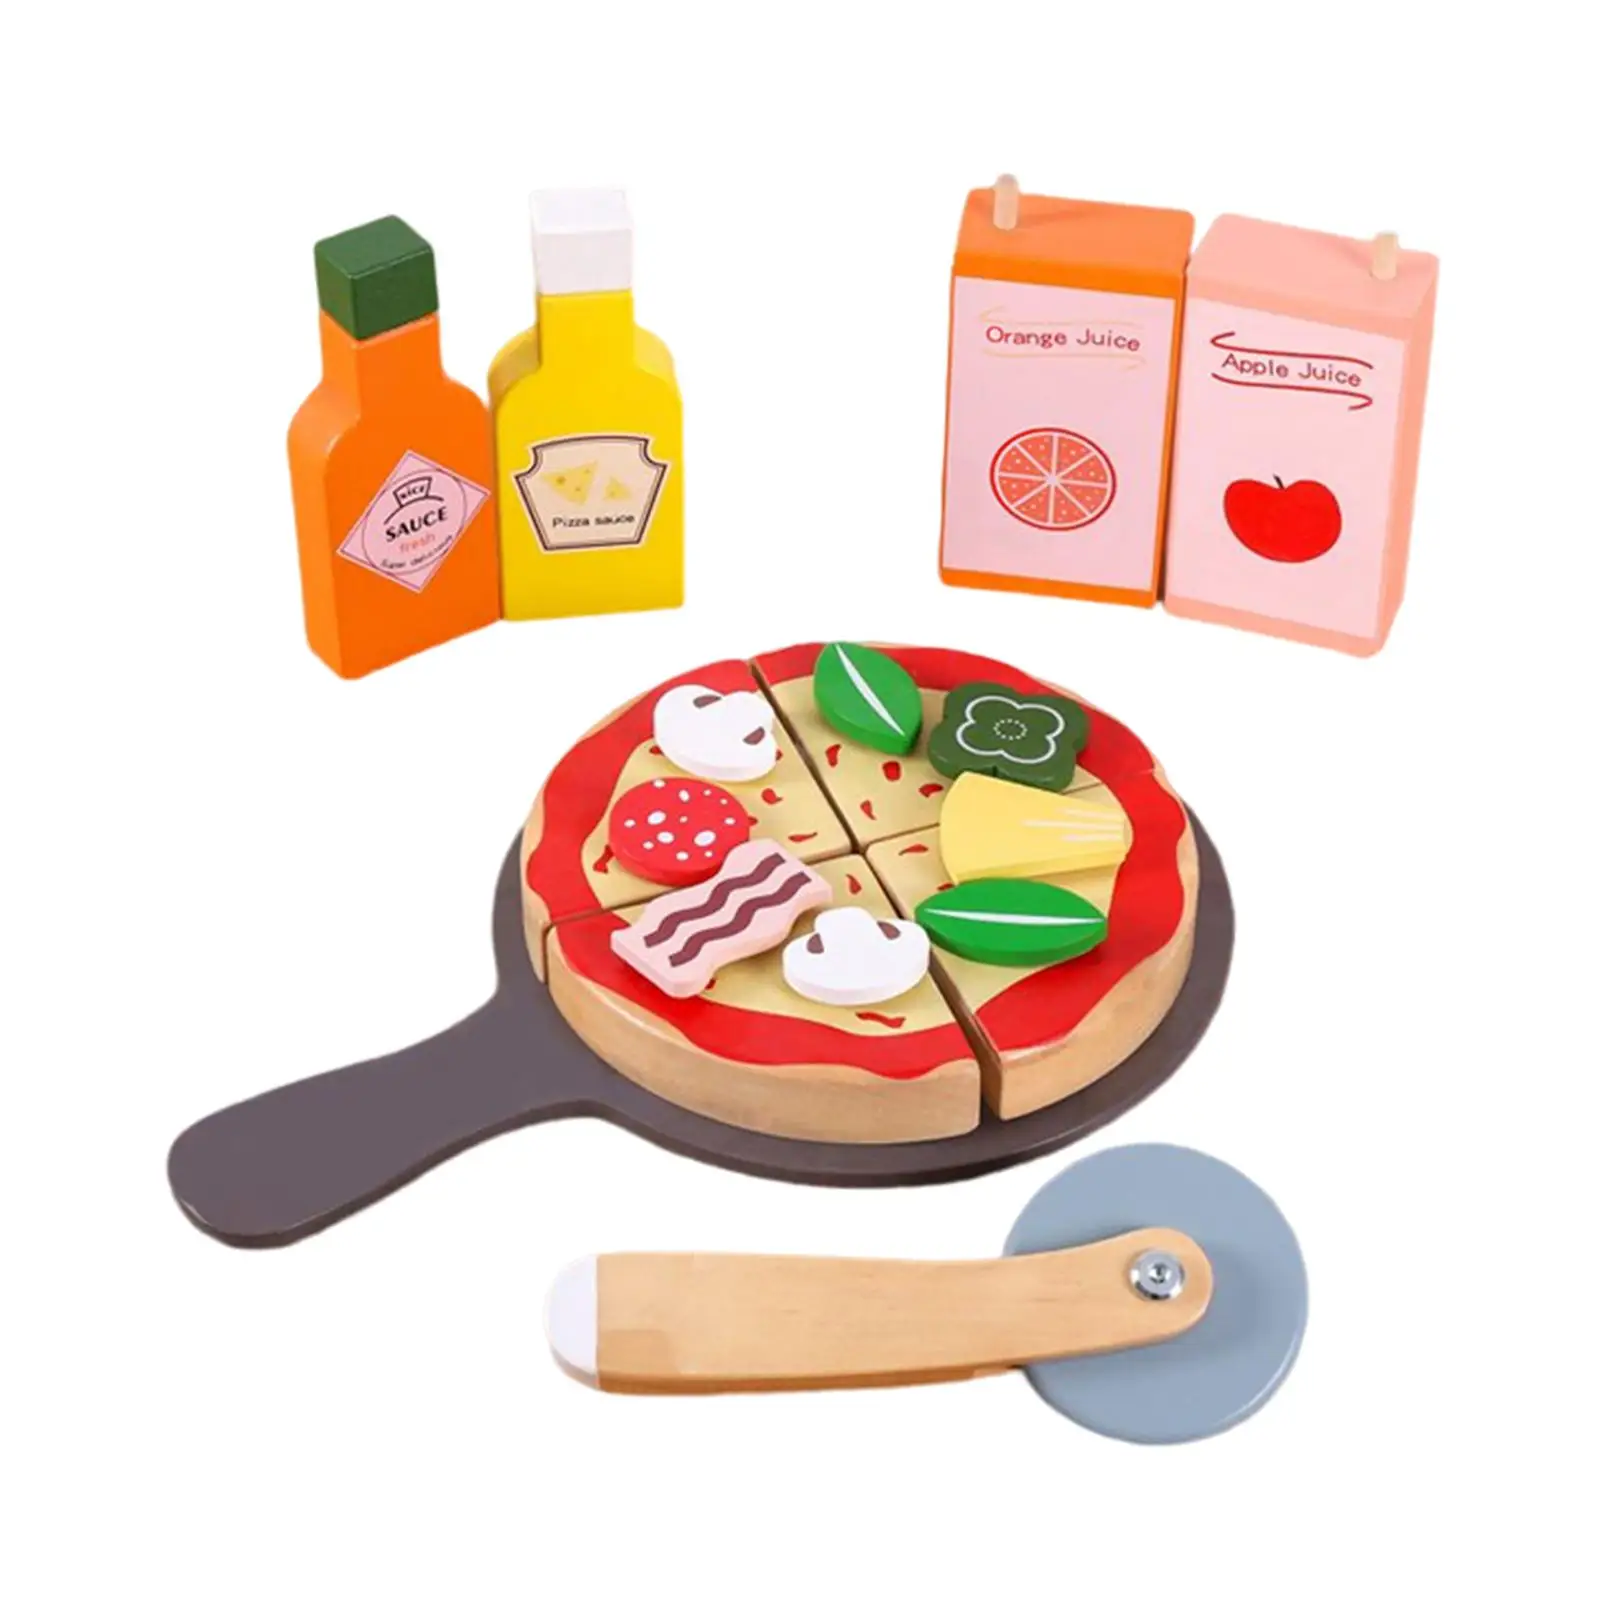 

Pizza Playset Toy Education Hands On Ability Montessori Toys Food Kitchen Toys for Girls Kids Ages 3 Years and up Boys Gifts